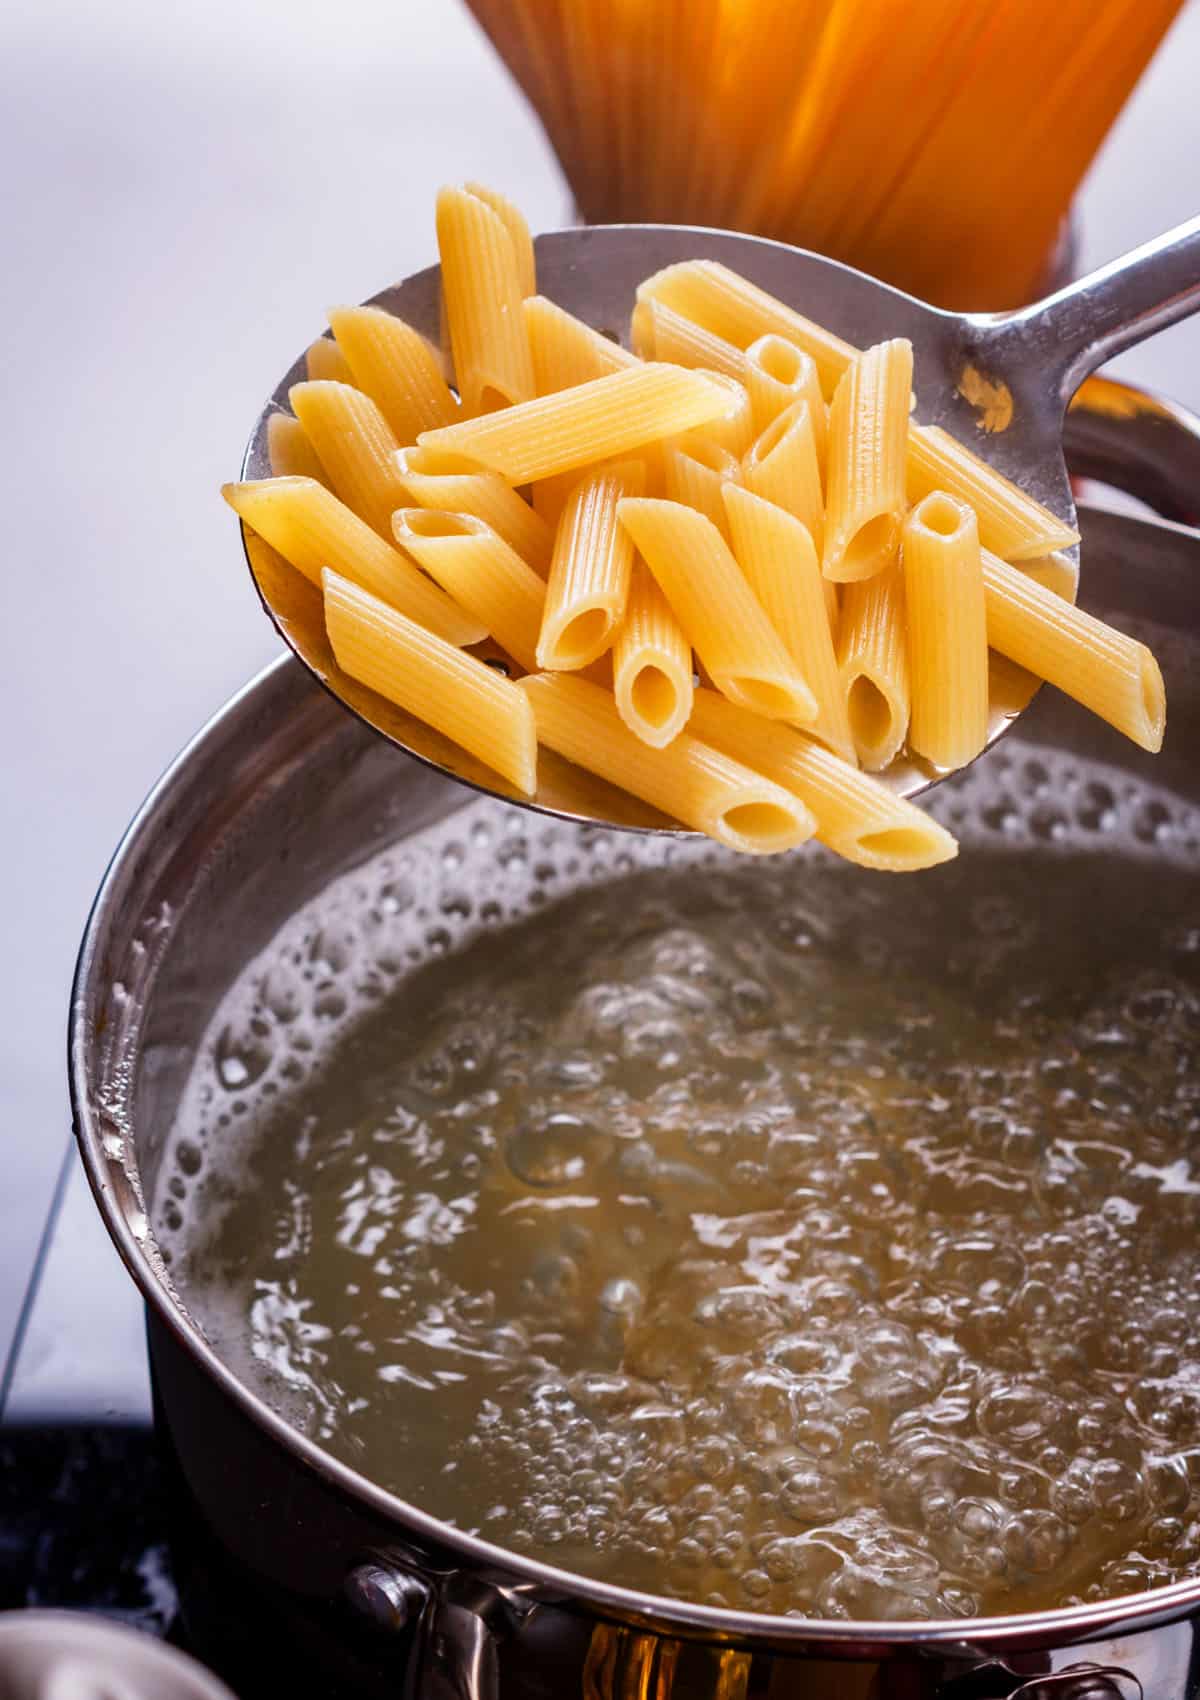 Ever wonder why your pasta is chewy and not silky smooth? It's a common problem for home cooks who haven't quite mastered the art of cooking pasta.